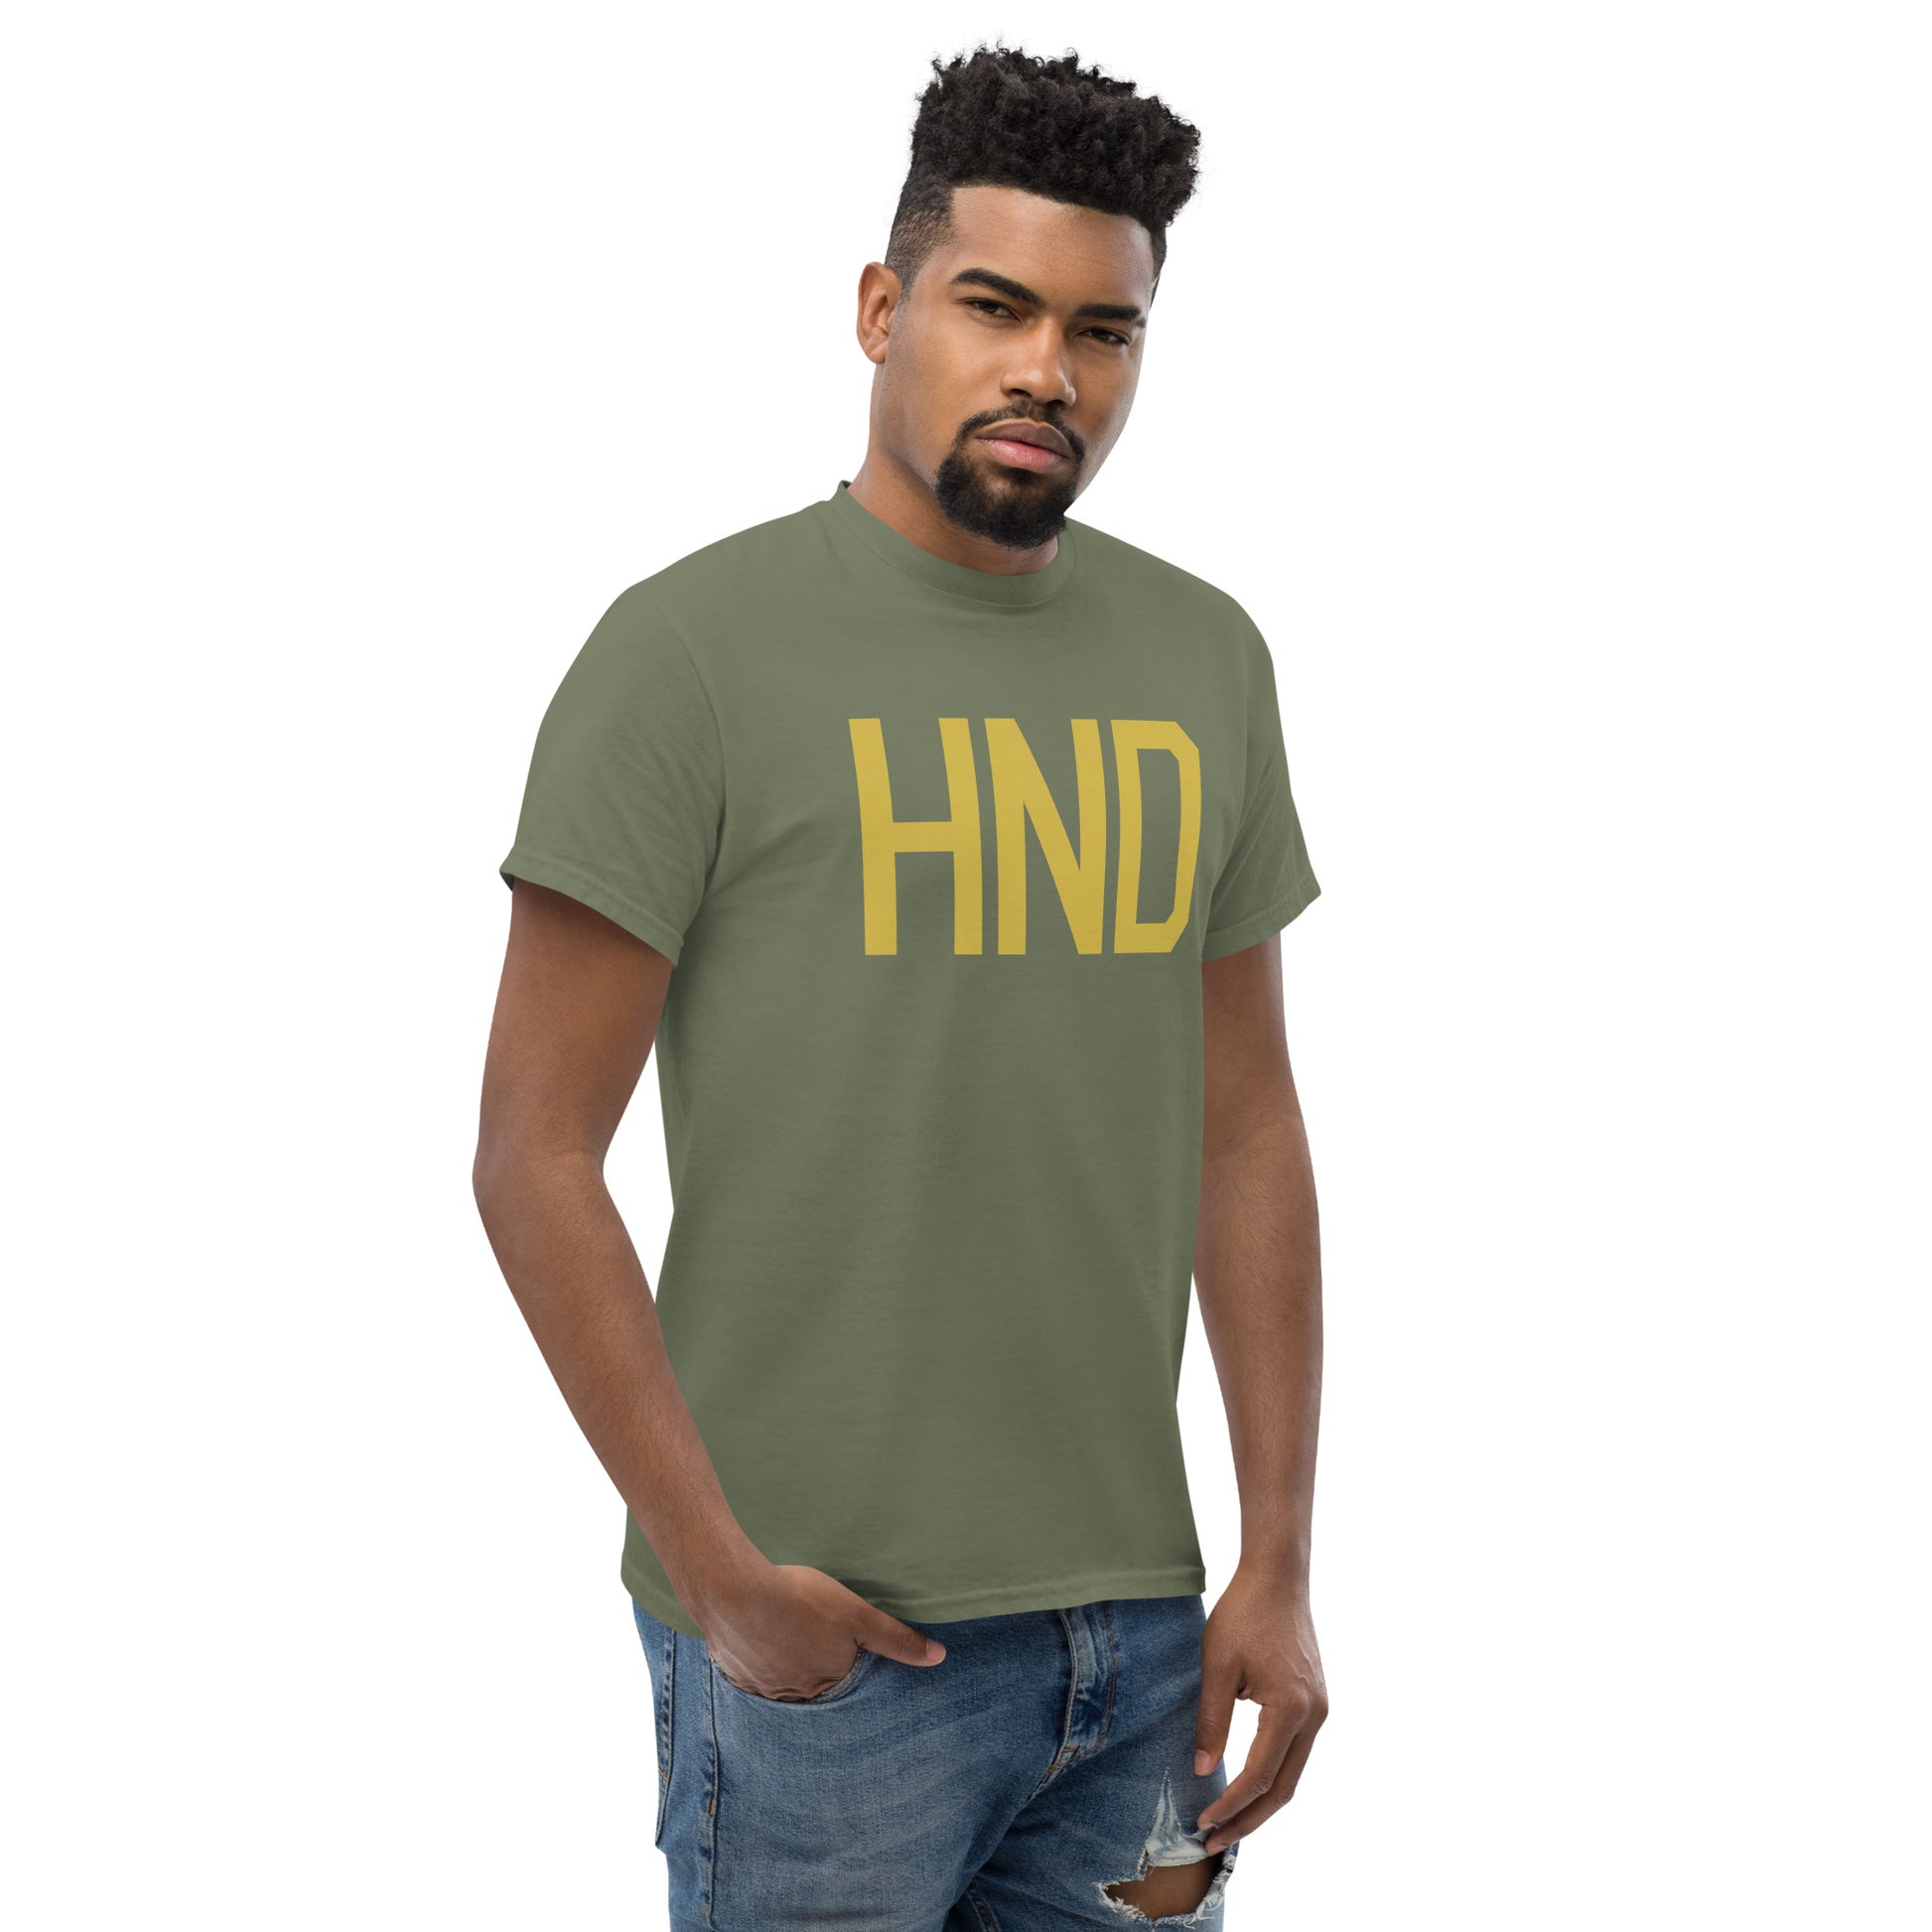 Aviation Enthusiast Men's Tee - Old Gold Graphic • HND Tokyo • YHM Designs - Image 08